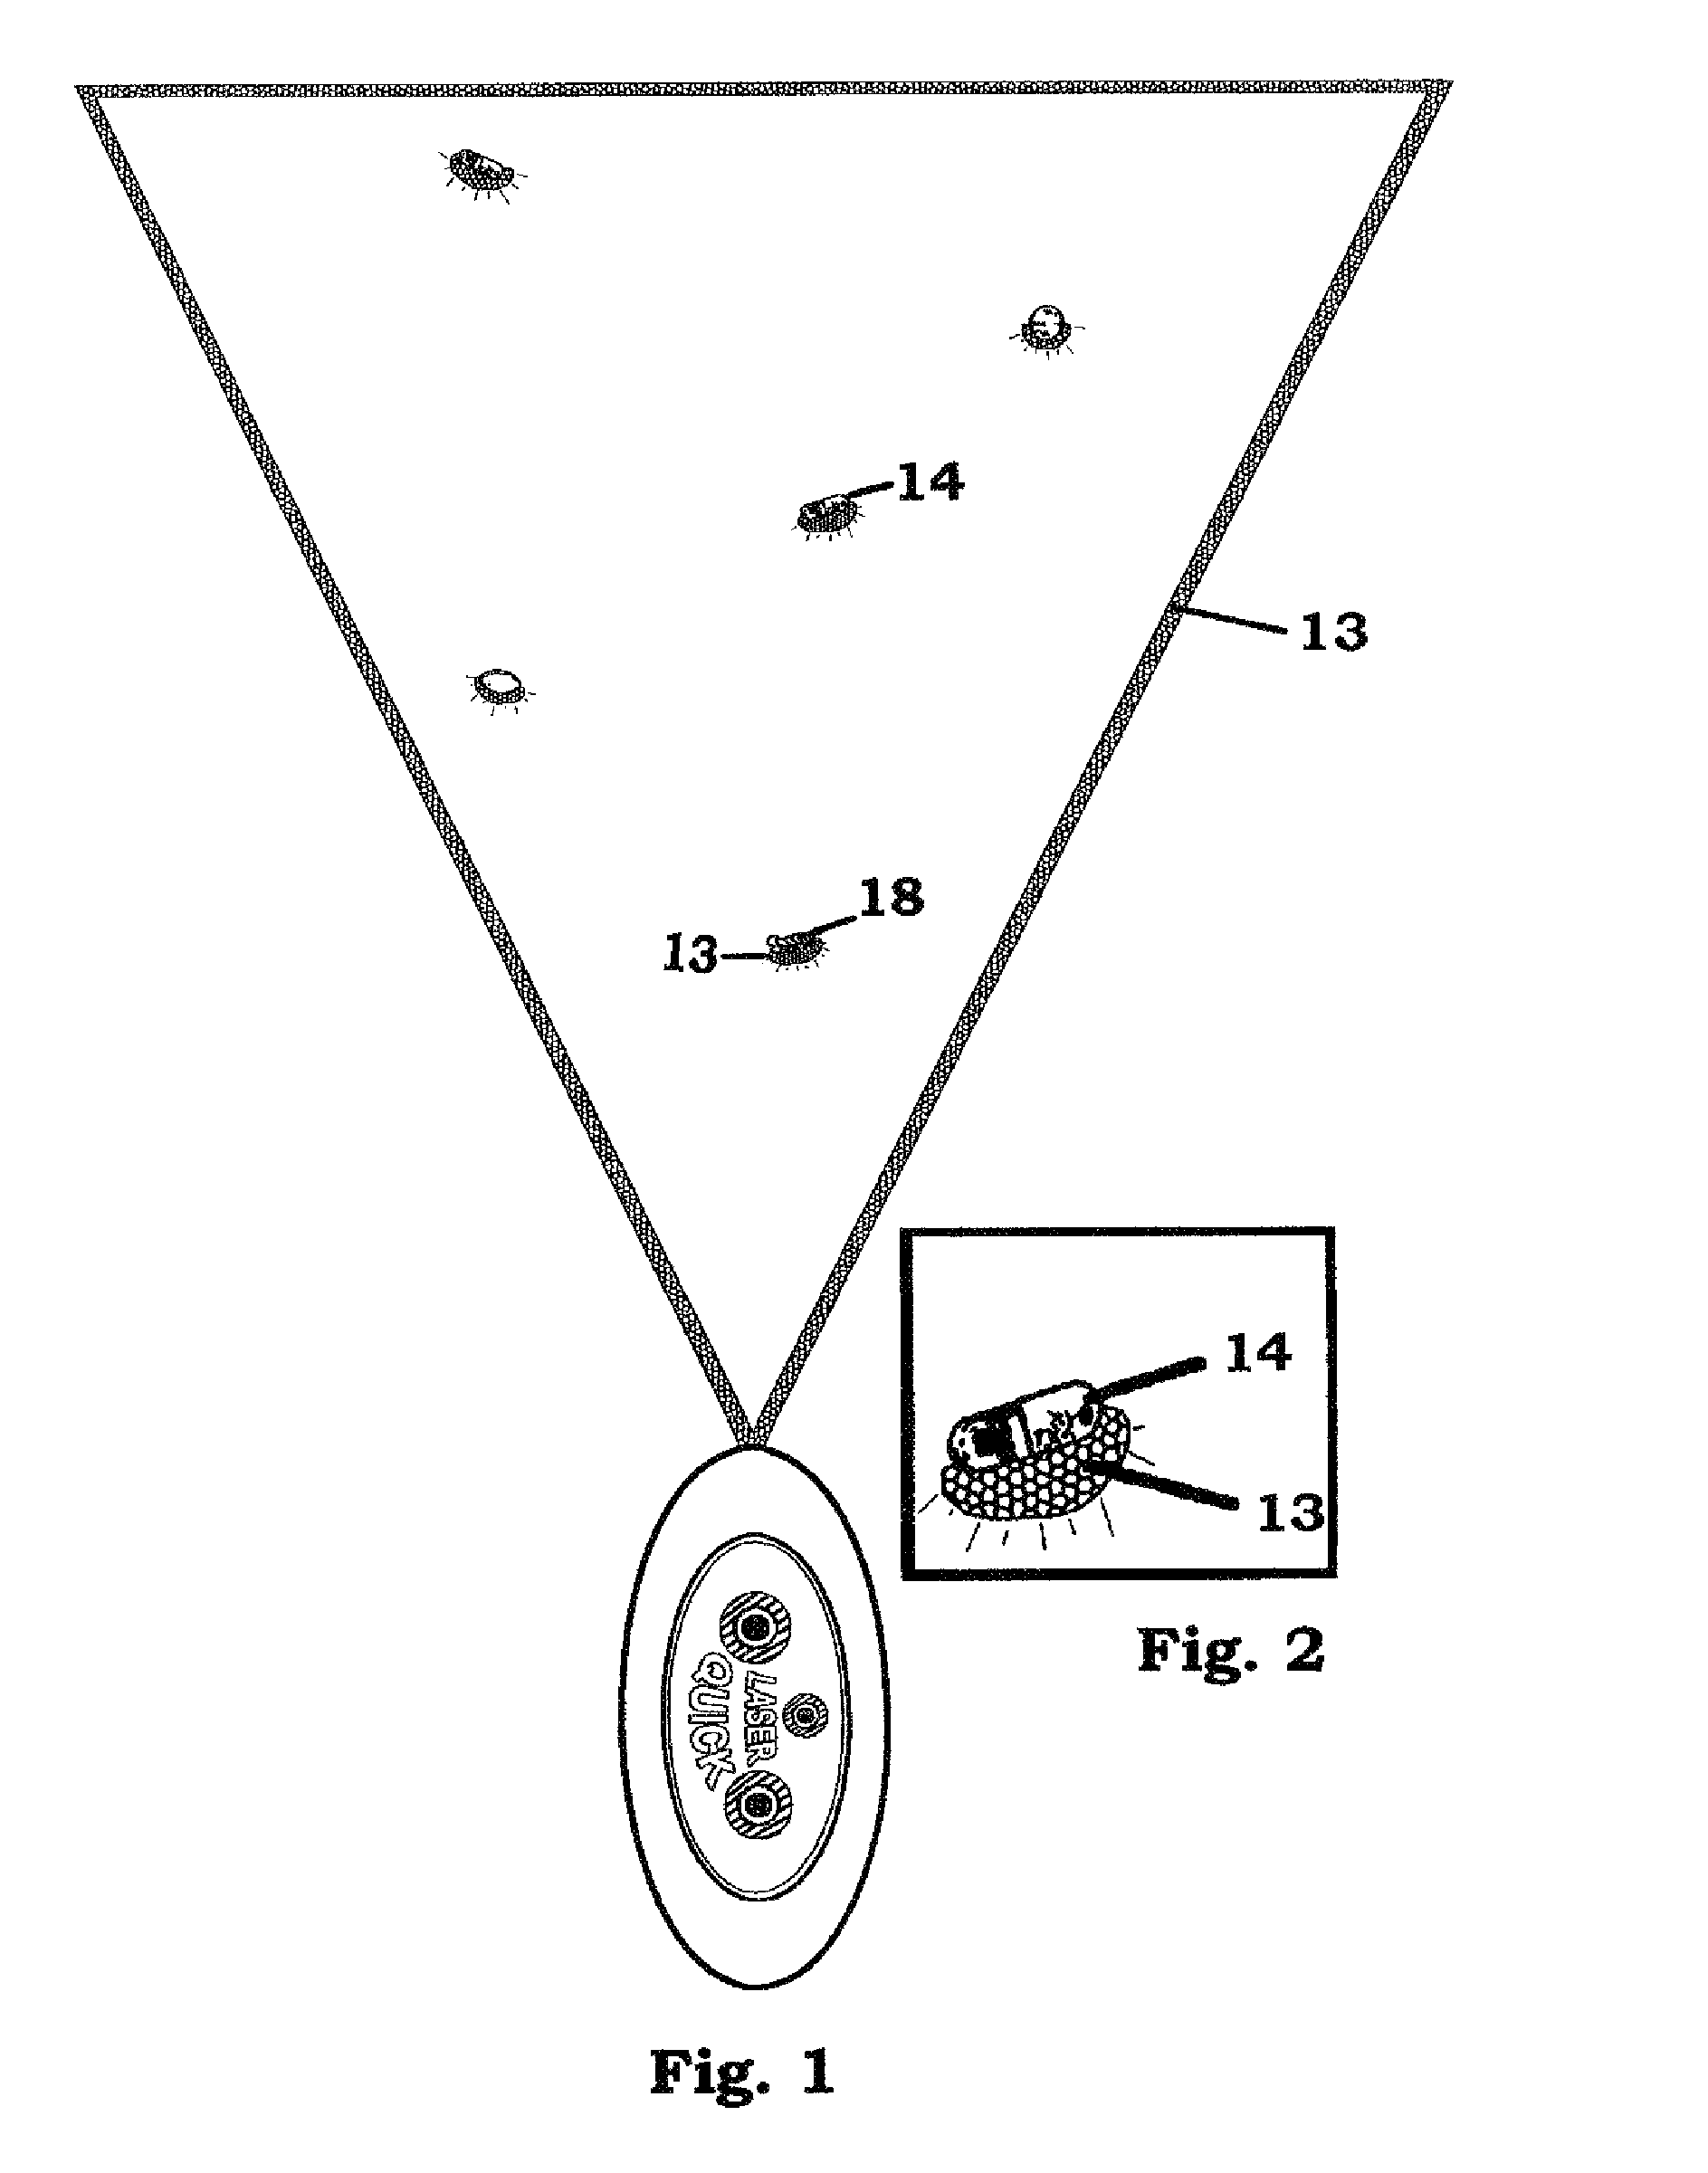 Projected scanning laser device and method for locating small objects